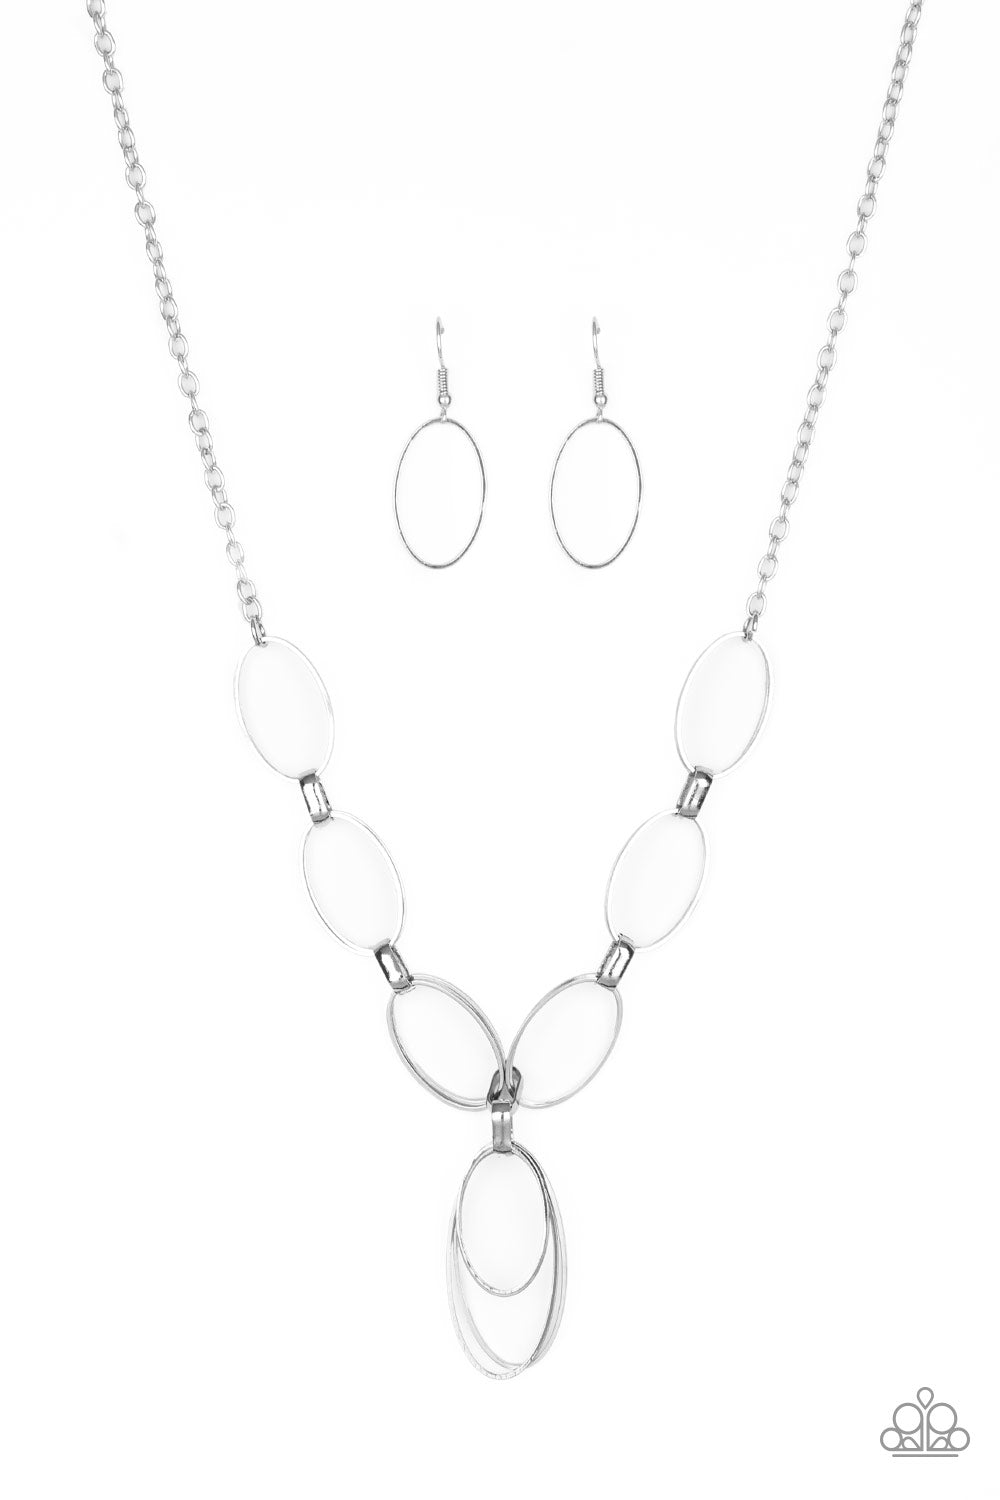 All OVAL Town - Silver necklace set